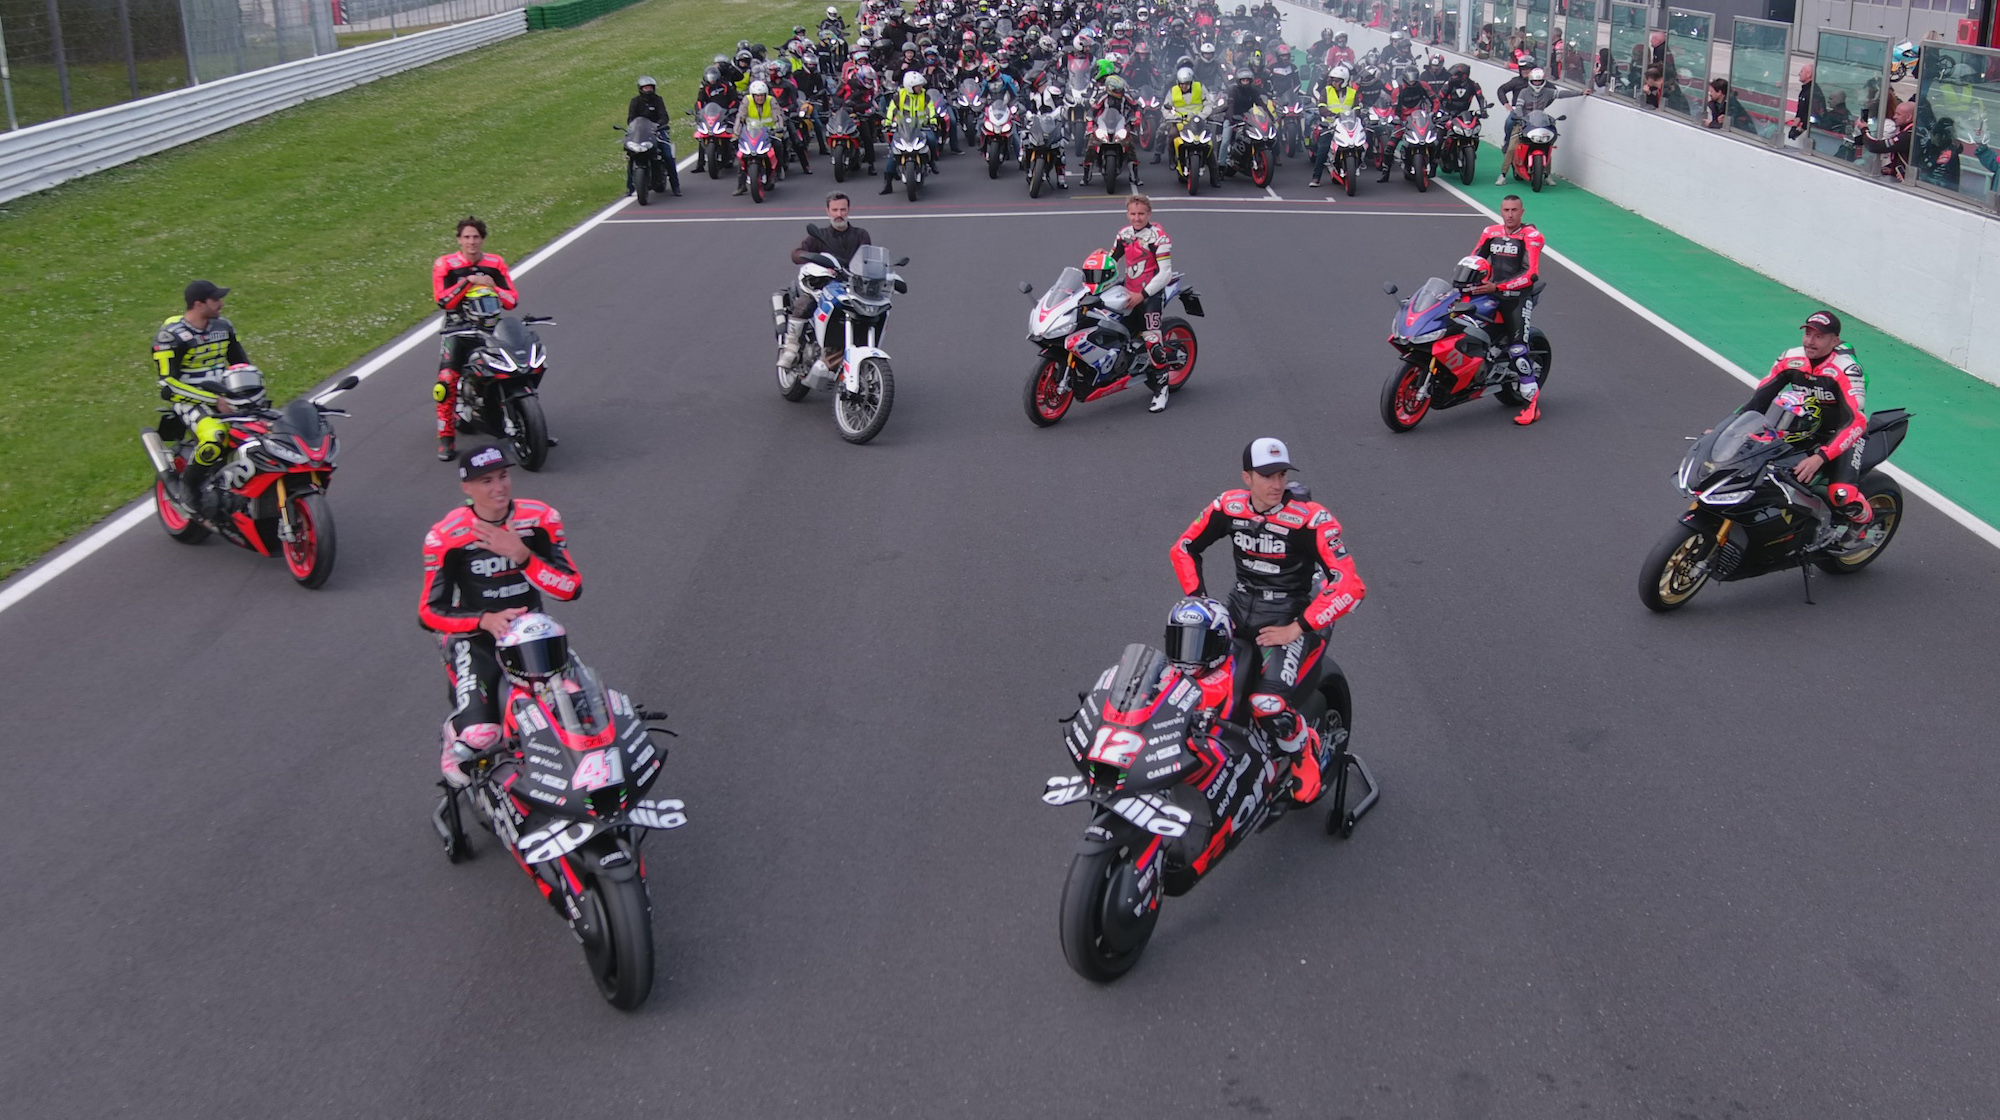 A view of previous years of Aprilia All Stars. Media sourced from Aprilia.